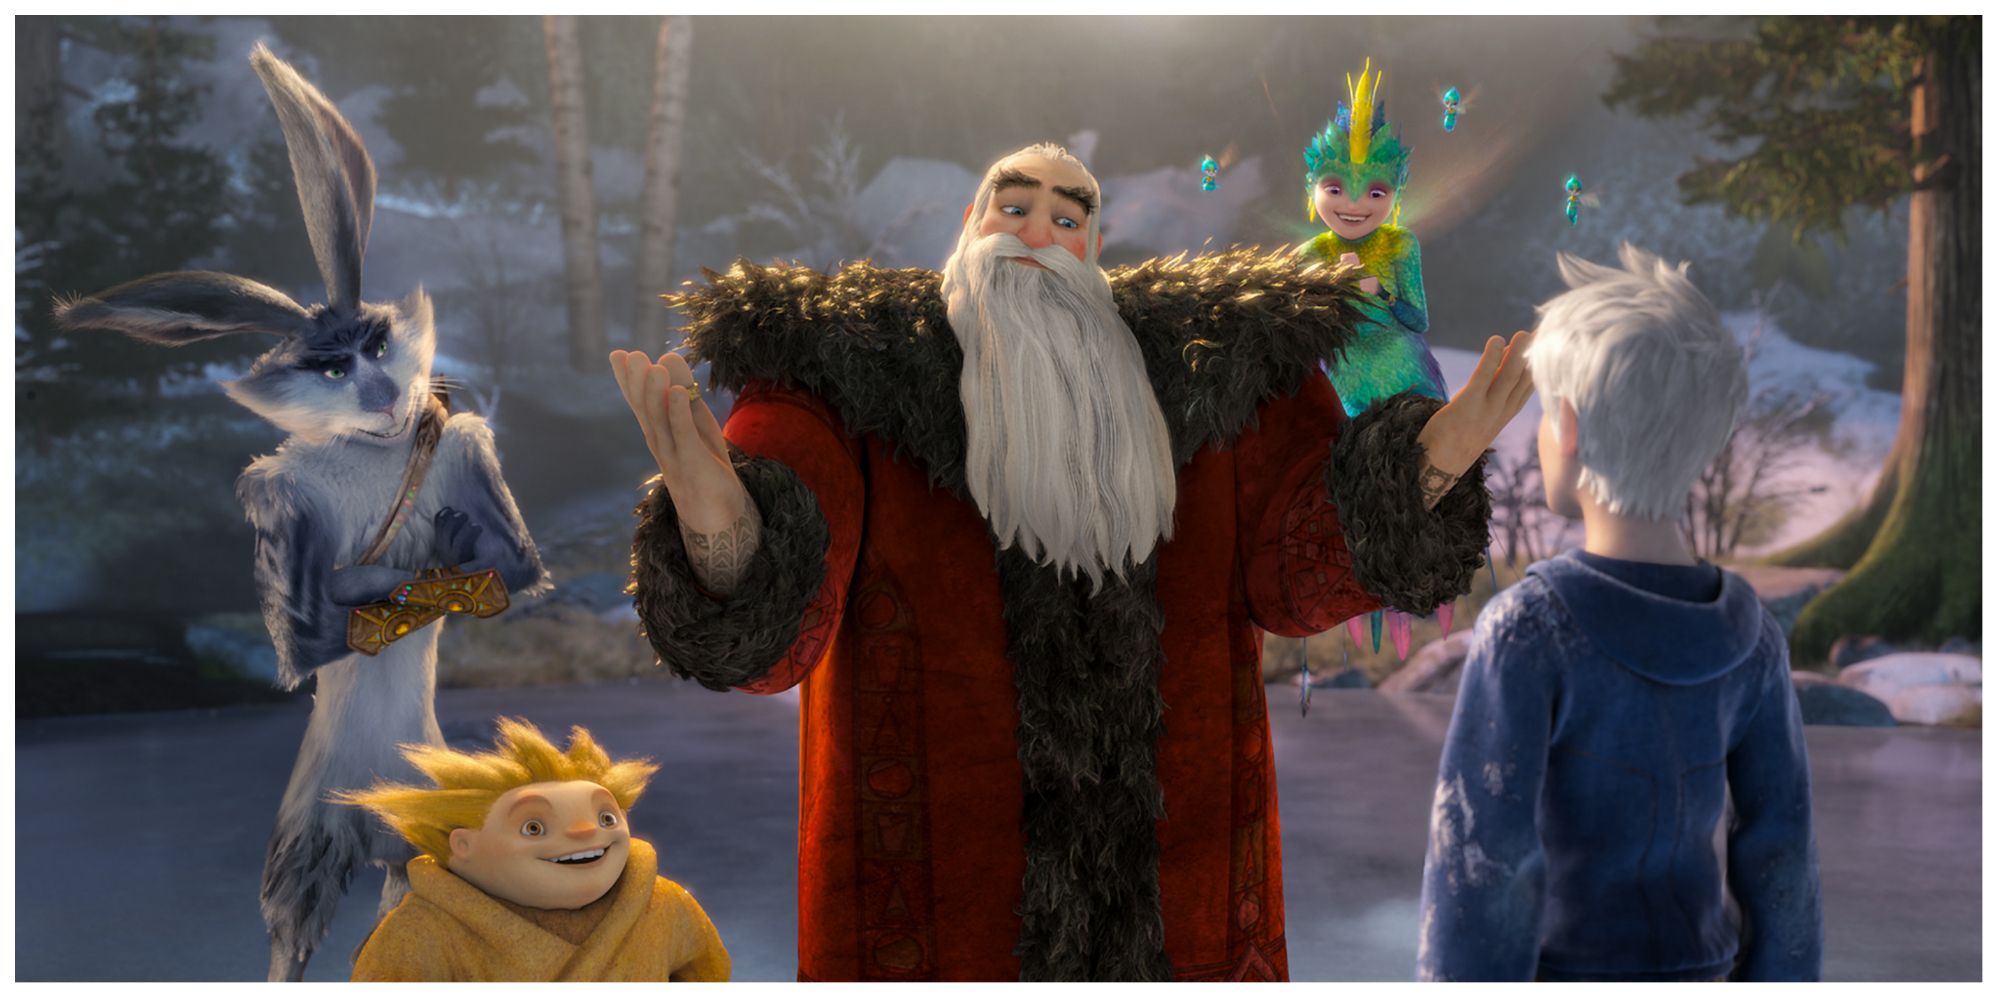 Jack Frost in DreamWorks' Rise of the Guardians.